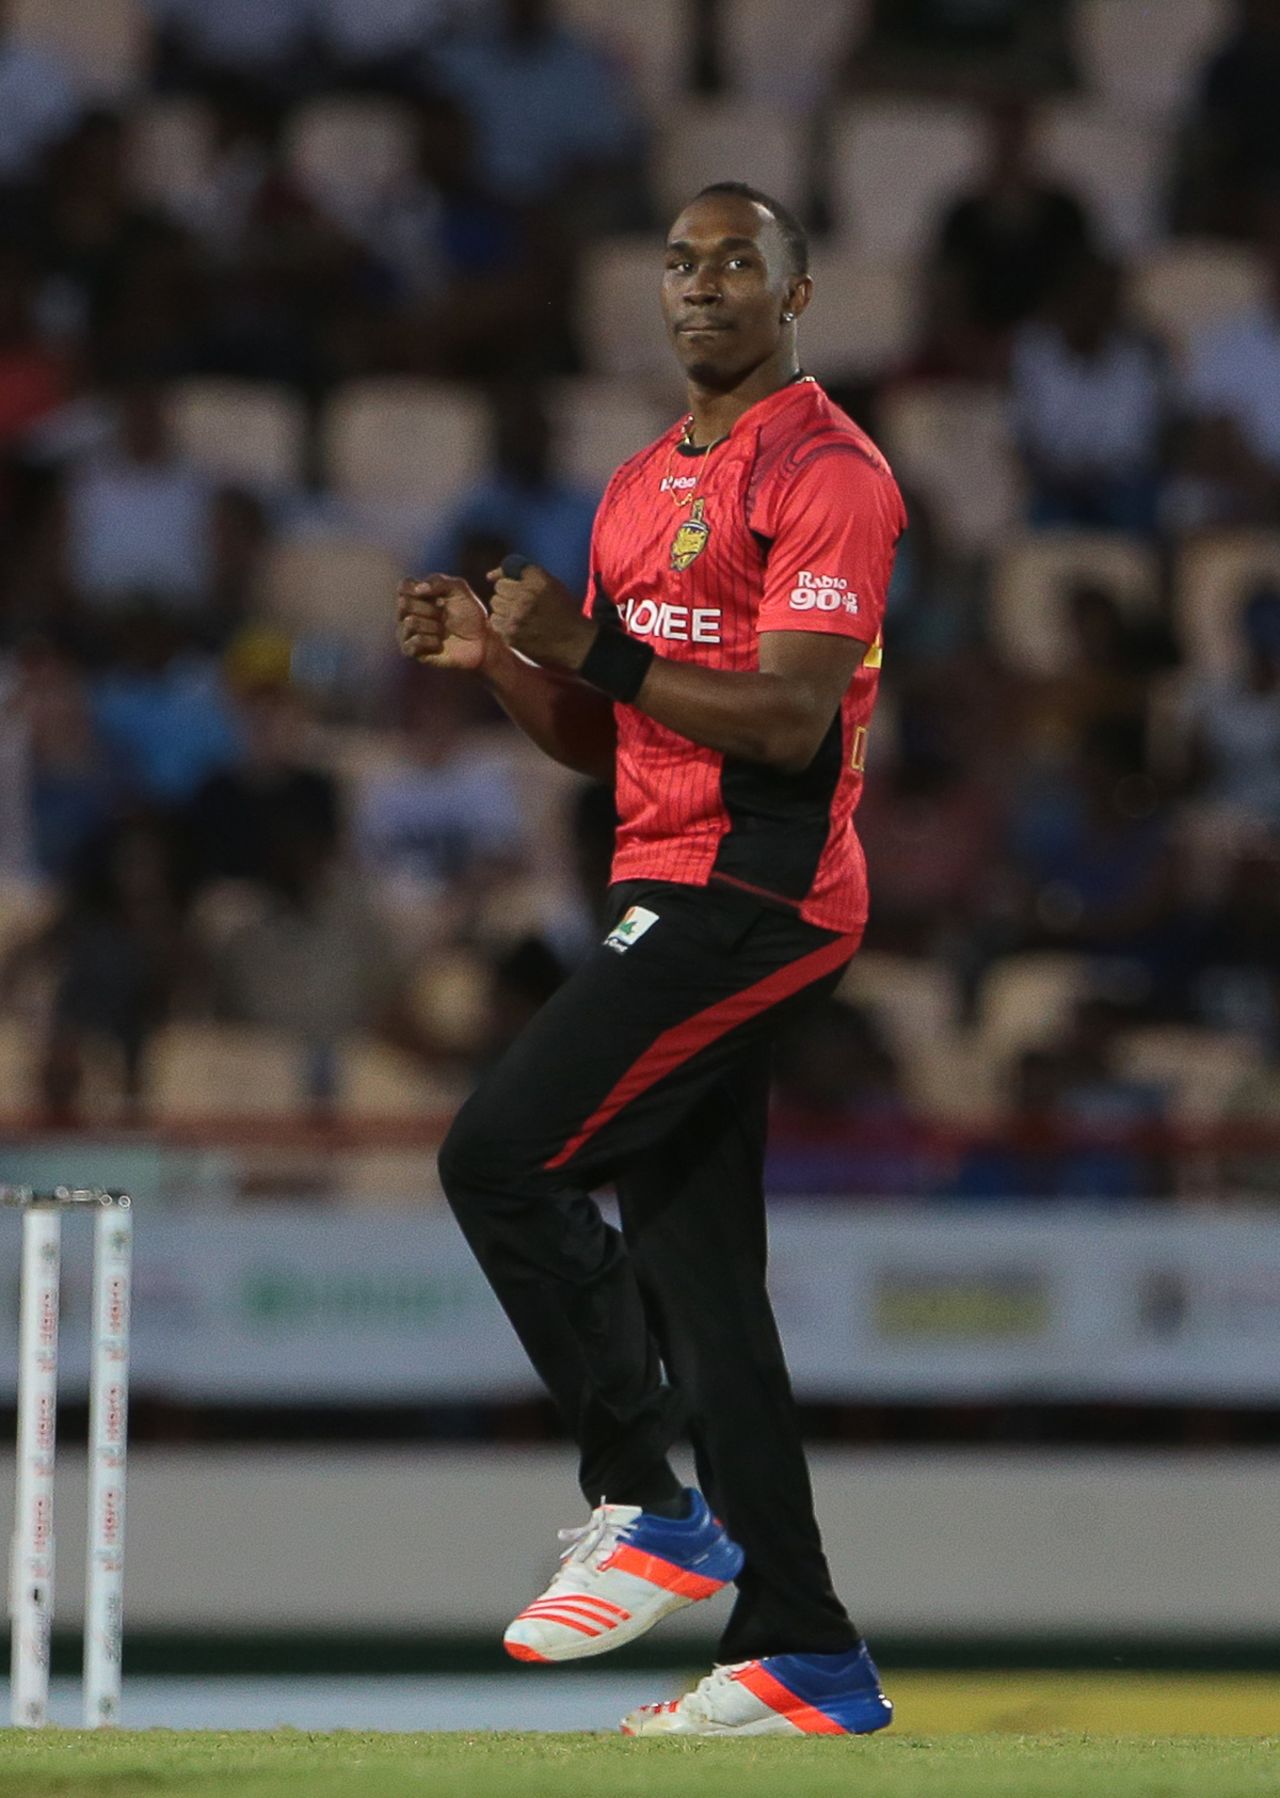 Dwayne Bravo celebrates one of his two wickets, St Lucia Zouks v Trinbago Knight Riders, CPL, Gros Islet, July 26, 2016